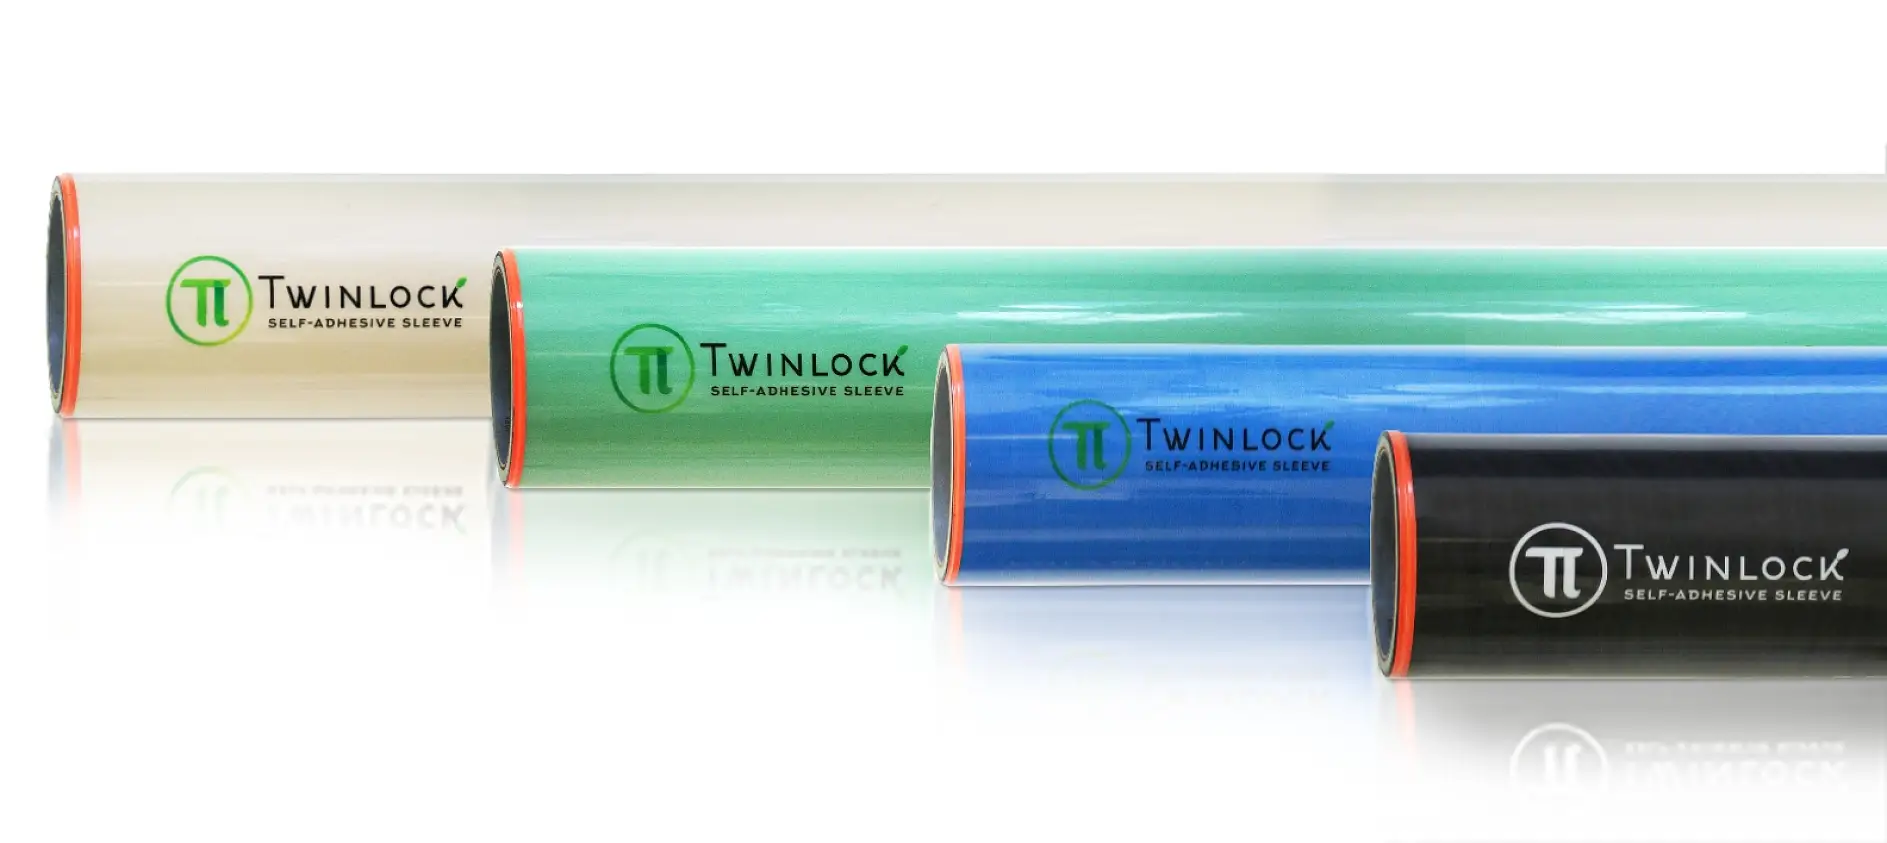 Polymount started in 2002 with the self-adhesive Twinlock Sleeve.